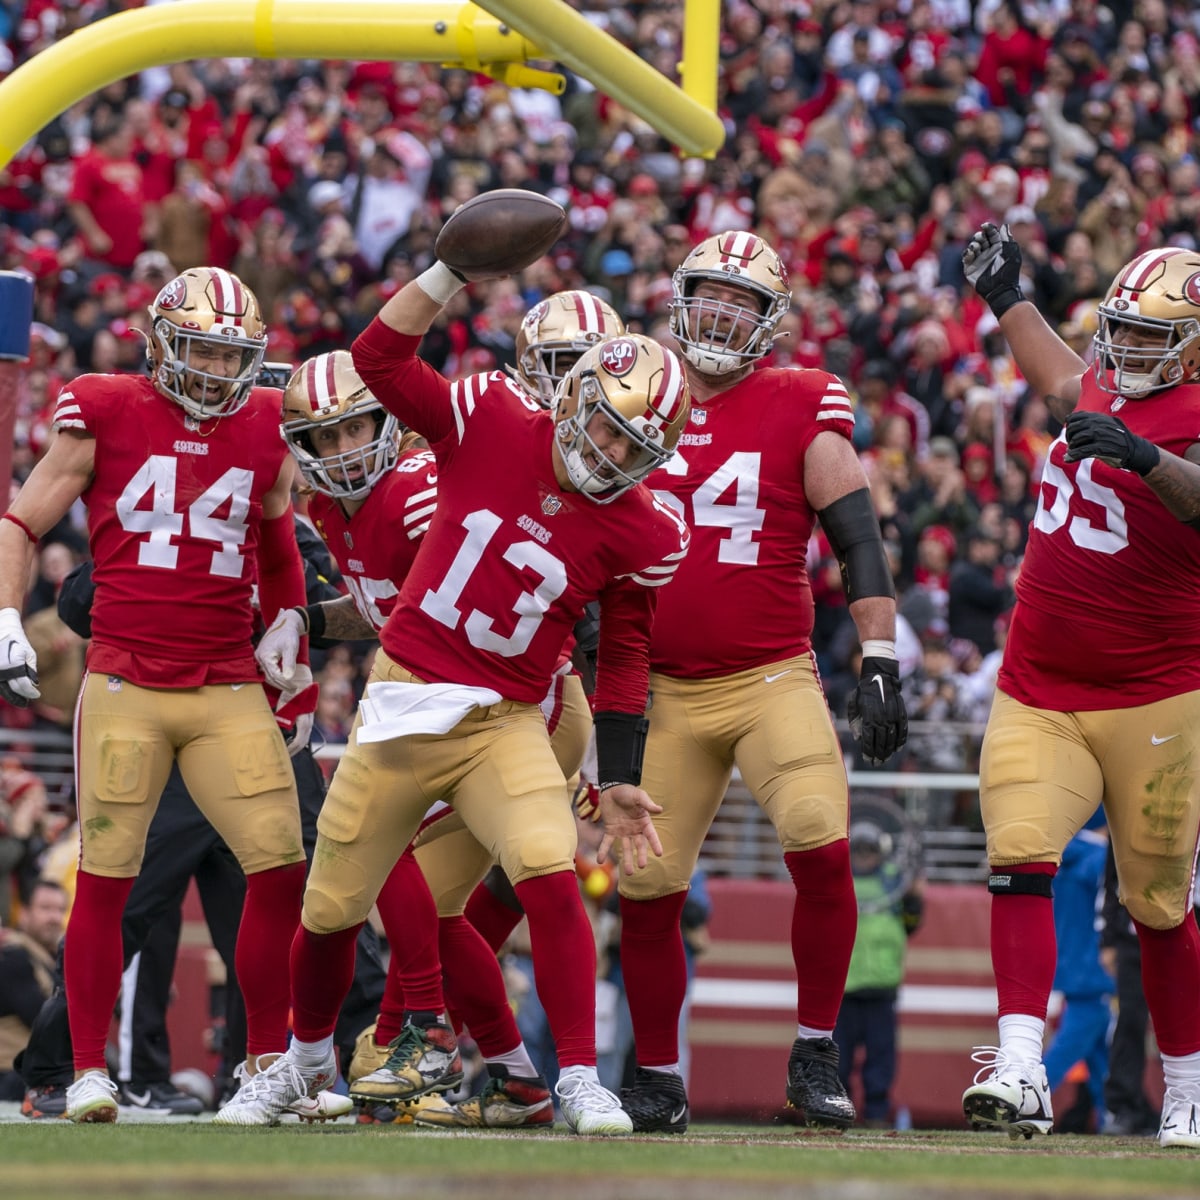 NY Giants vs. 49ers: Time, TV channel, radio, streaming on